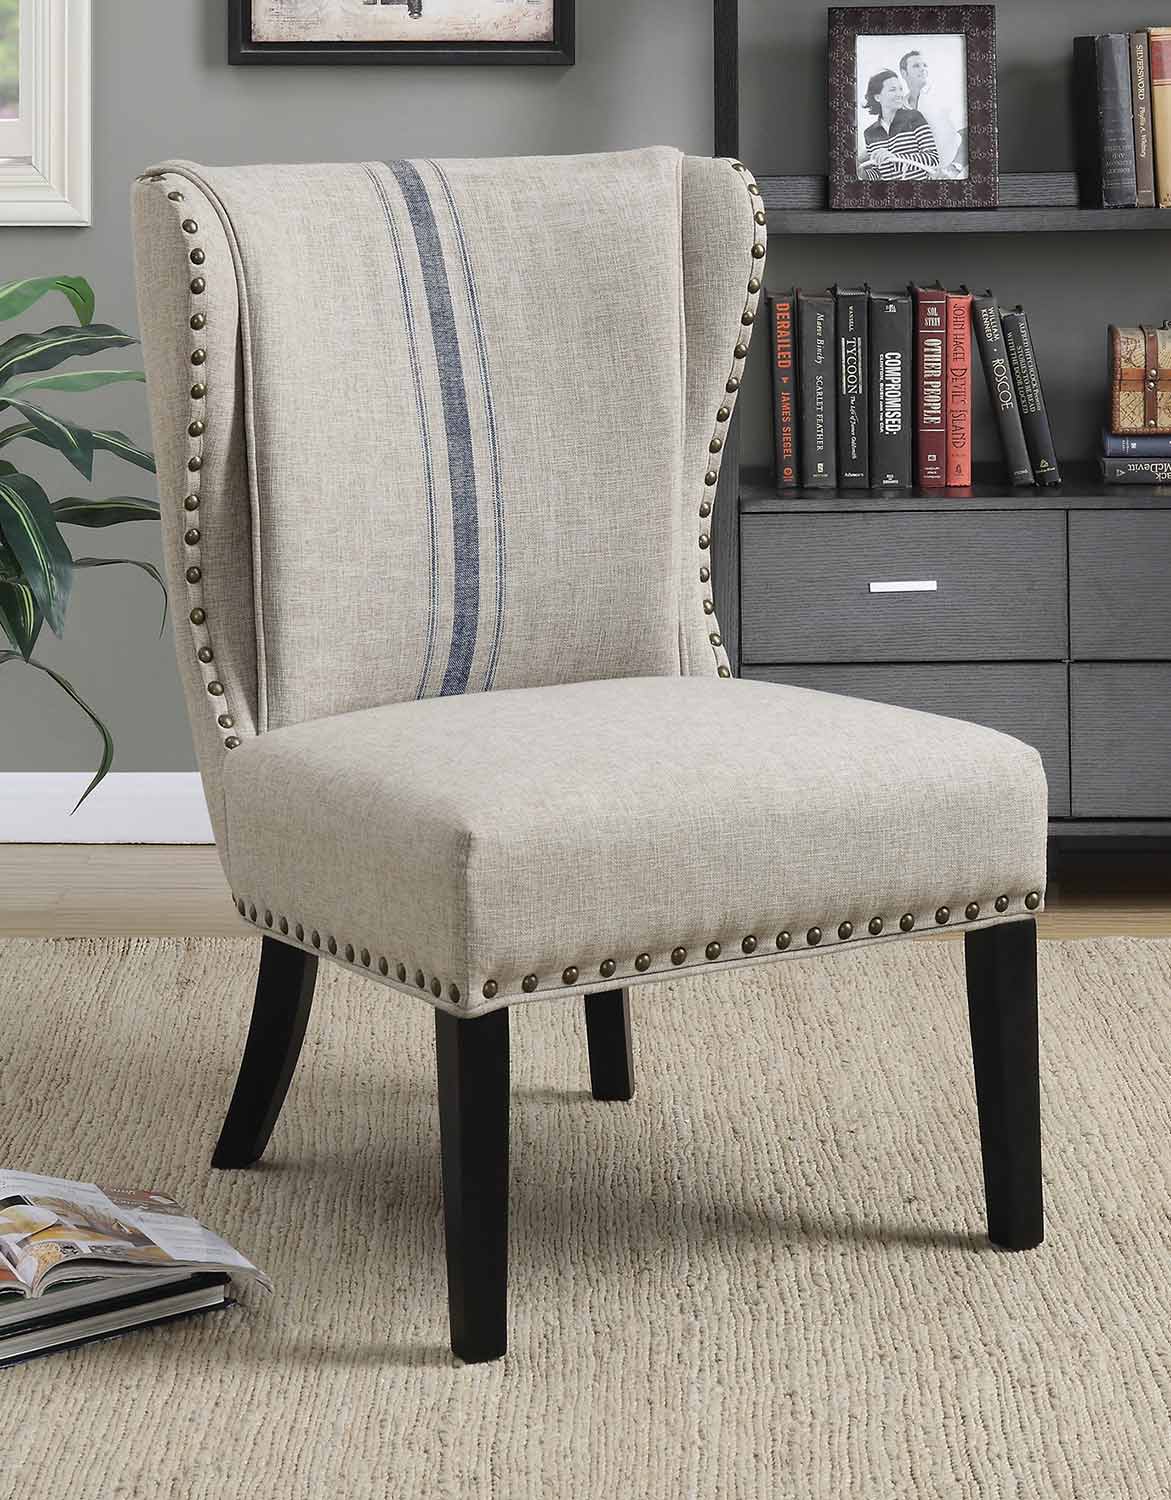 Coaster 902496 Accent Chair - Grey/Blue